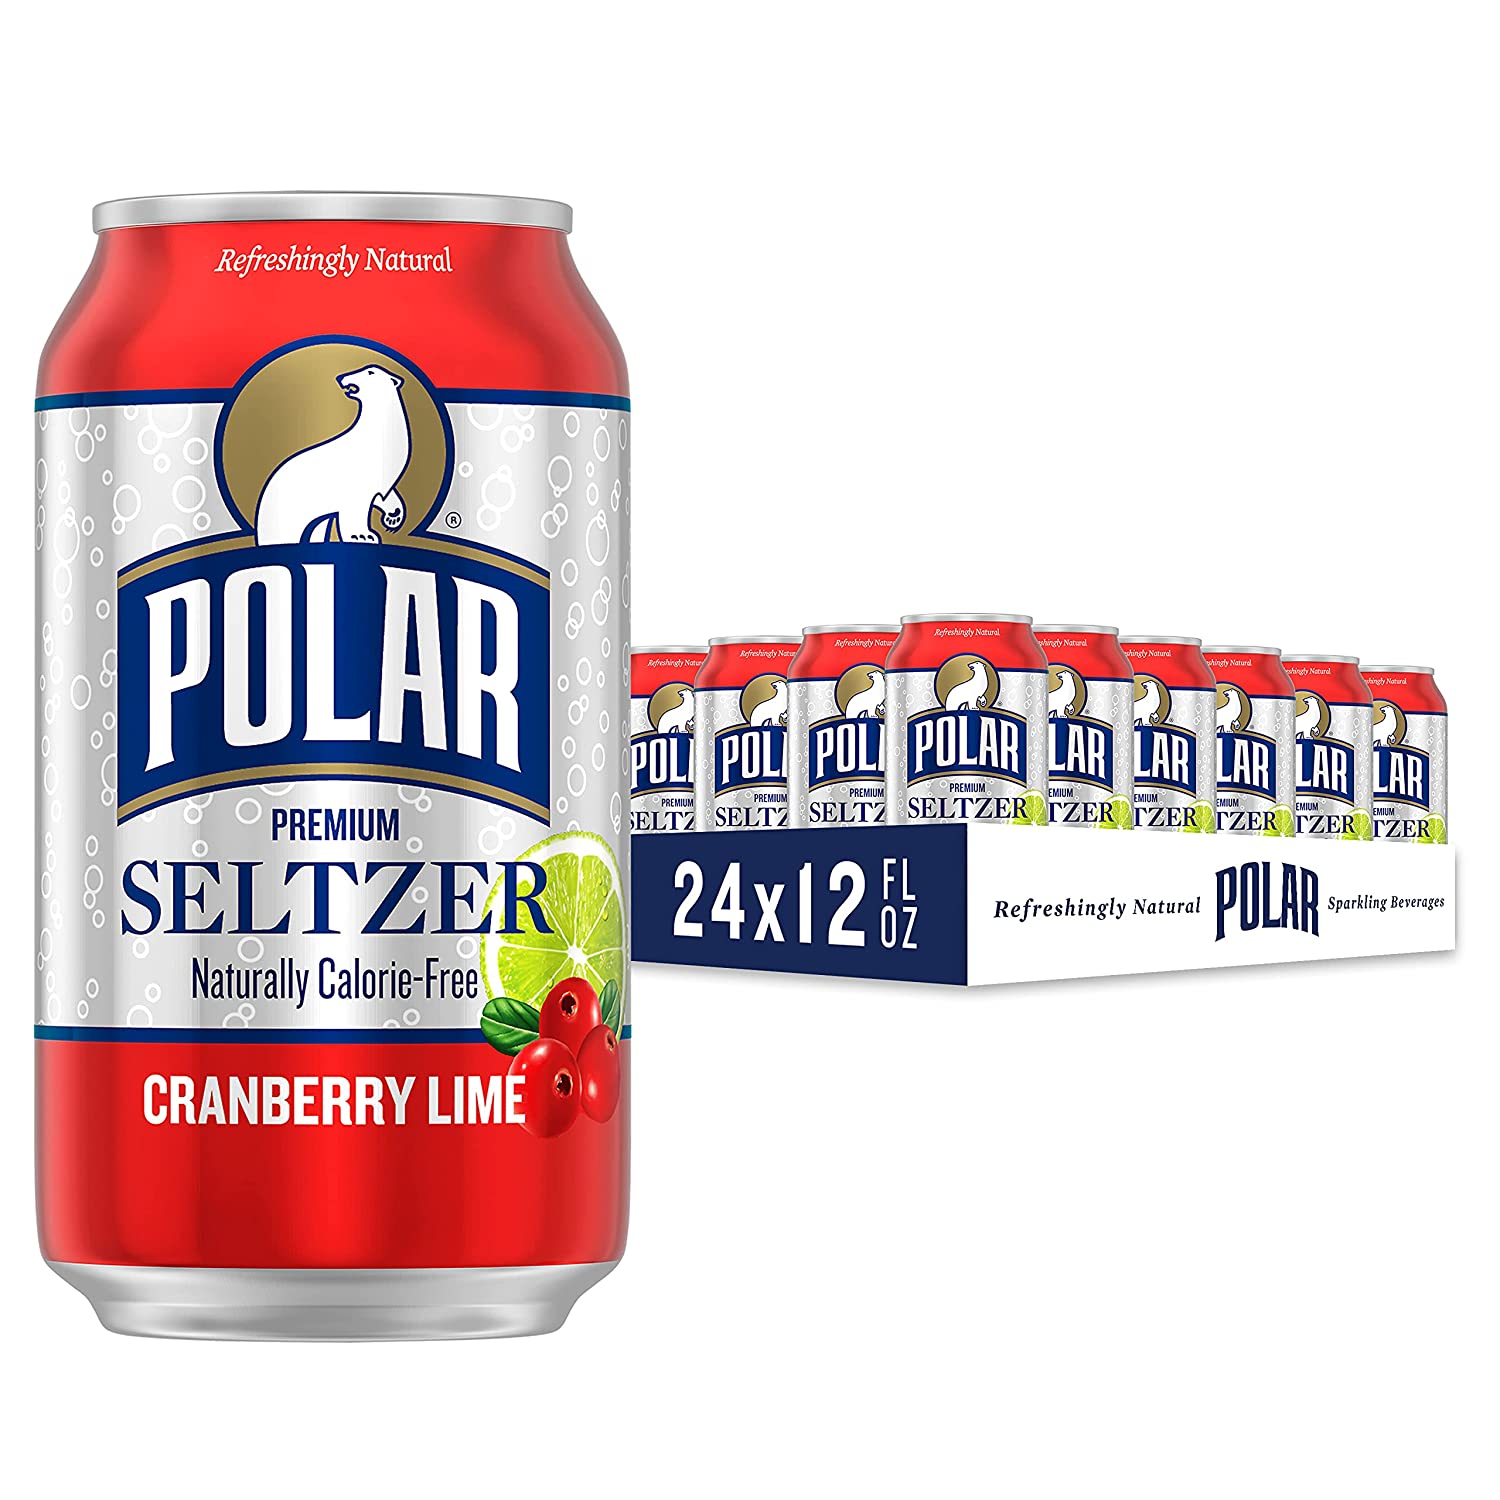 24-Pack 12-Oz Polar Seltzer Water (Cranberry Lime) $7.79 w/ S&S + Free Shipping w/ Prime or on orders over $25